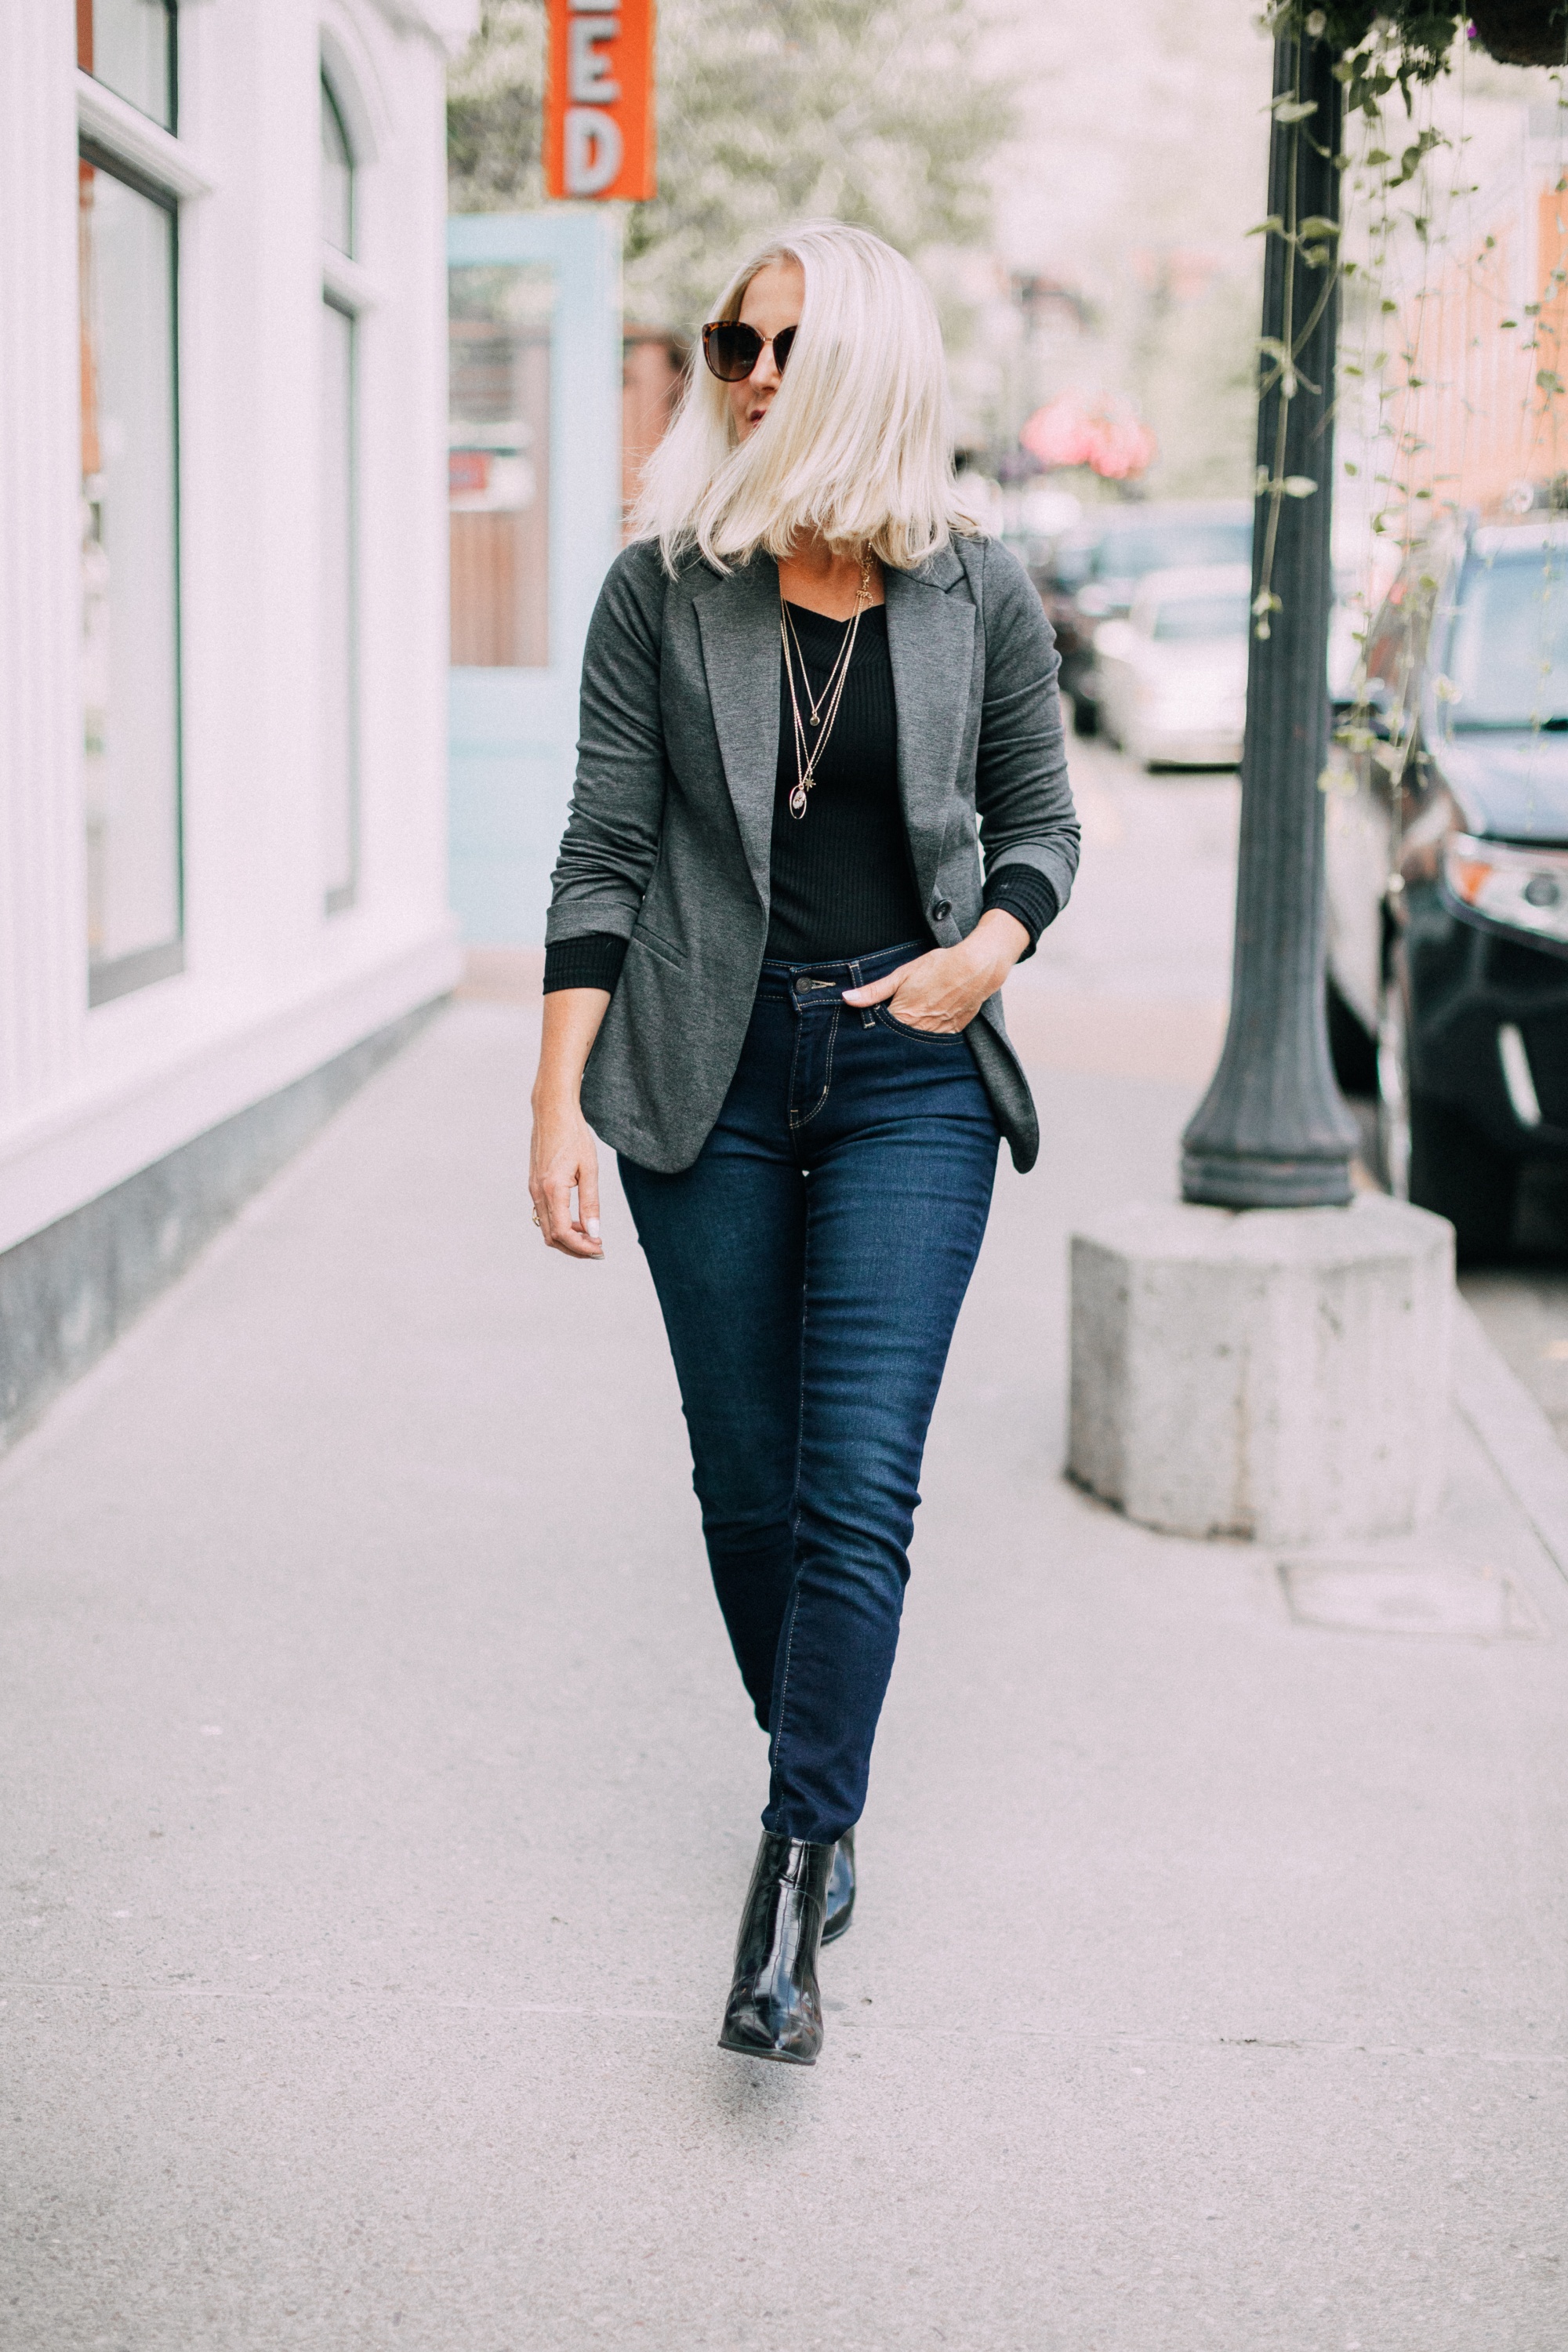 How to layer necklaces, Fashion blogger Erin Busbee of BusbeeStyle.com wearing Levi jeans, black booties, black off the shoulder top, and gray knit blazer from JCPenney with a pre-layered necklace in Telluride, CO